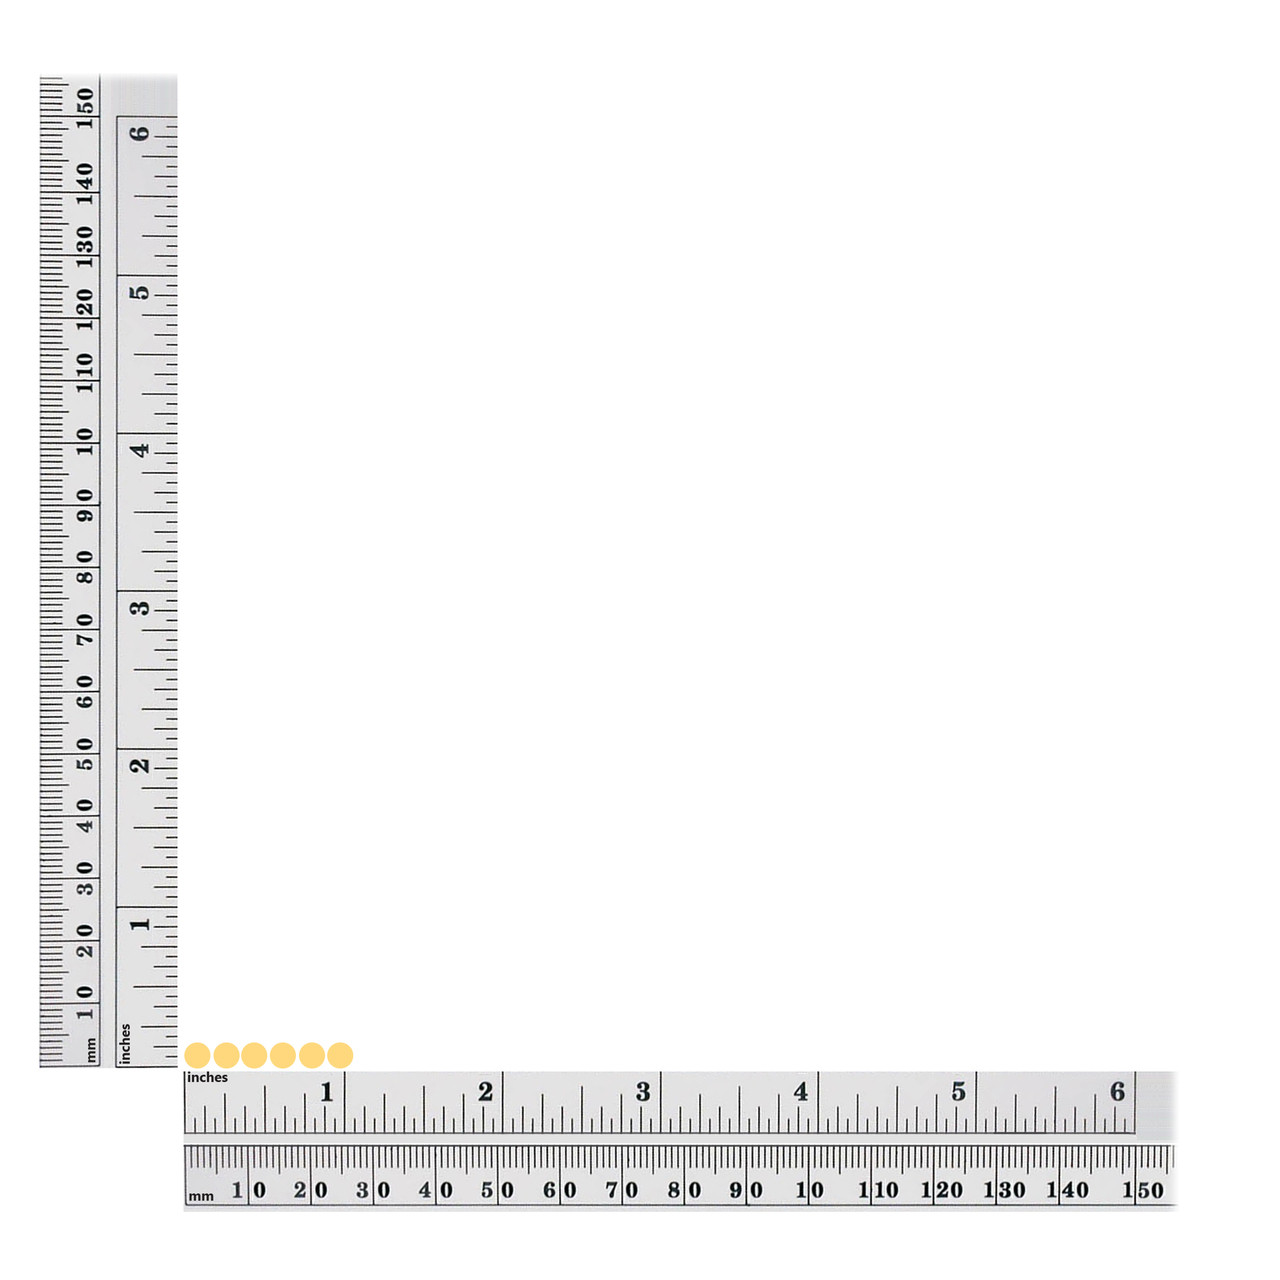 4mm cup sequin size chart